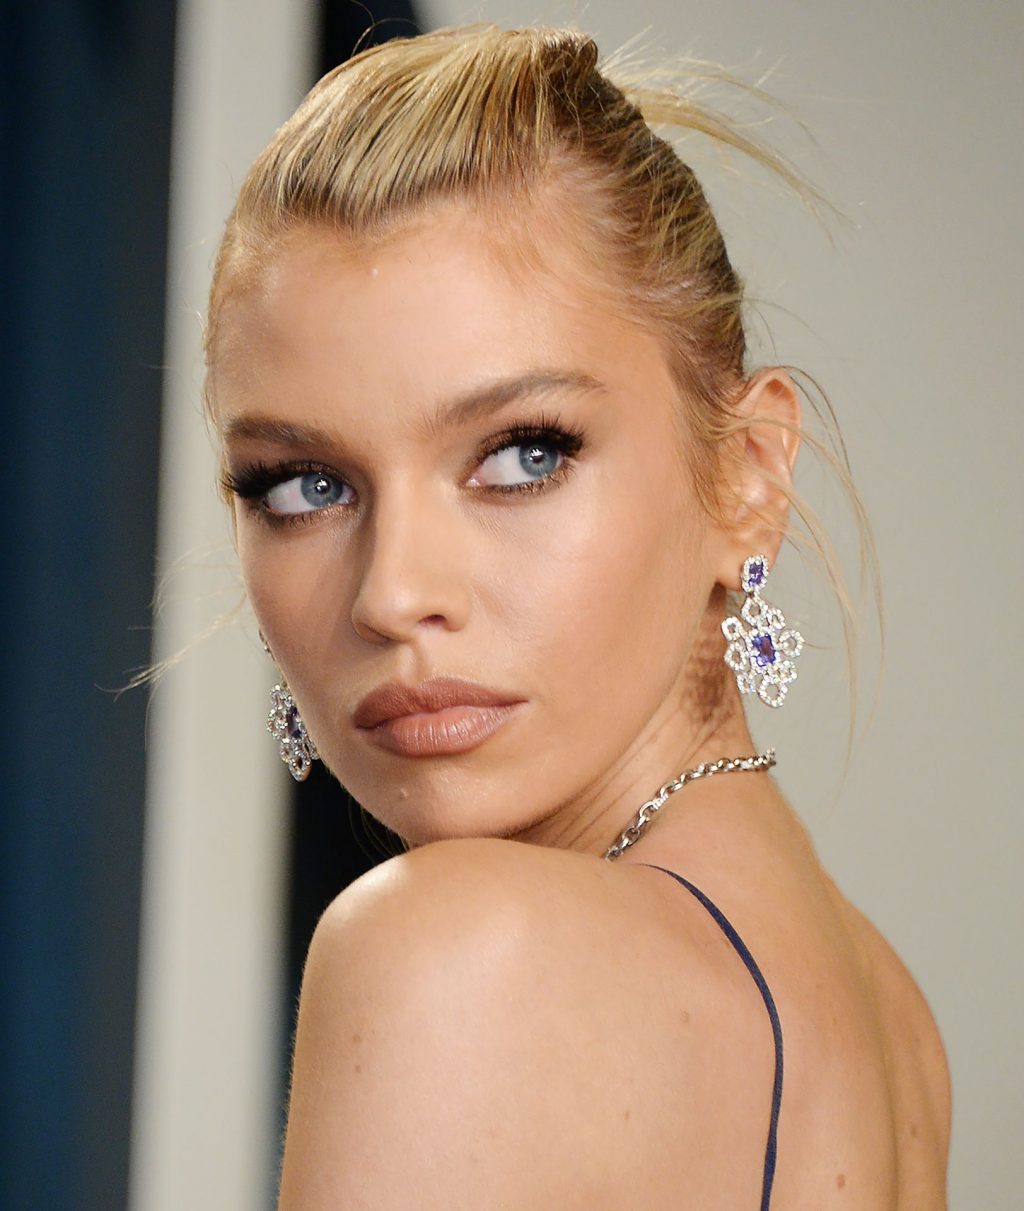 Braless Stella Maxwell Looks Hot in a Blue Gown (32 Photos)